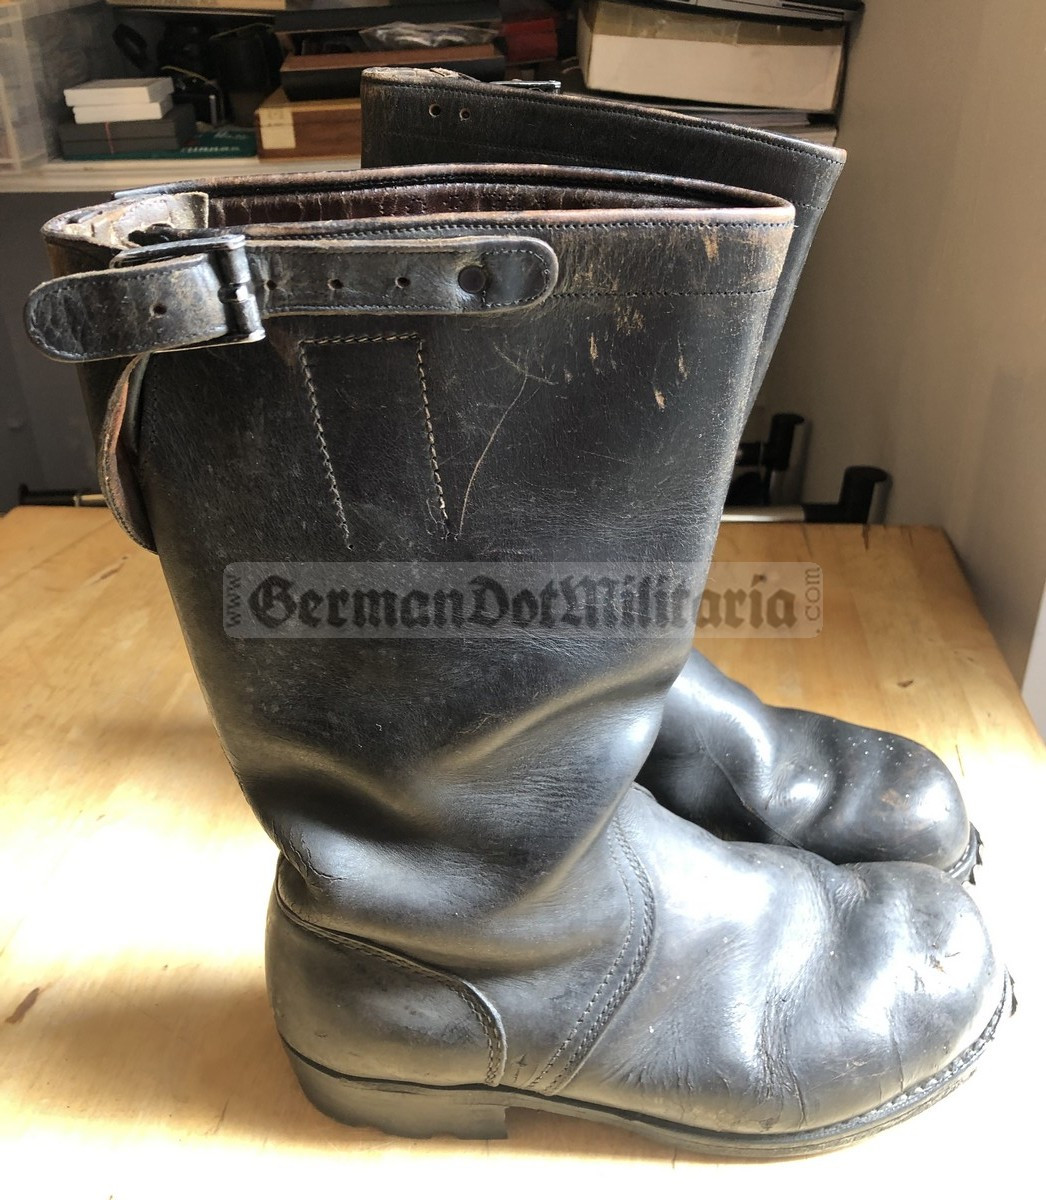 wo391 - c1960s West German Bundeswehr army leather Boots Stiefel with metal  tips- NVA size 26.5/EU size 40/US size 7.5/UK size 7 - GermanDotMilitaria